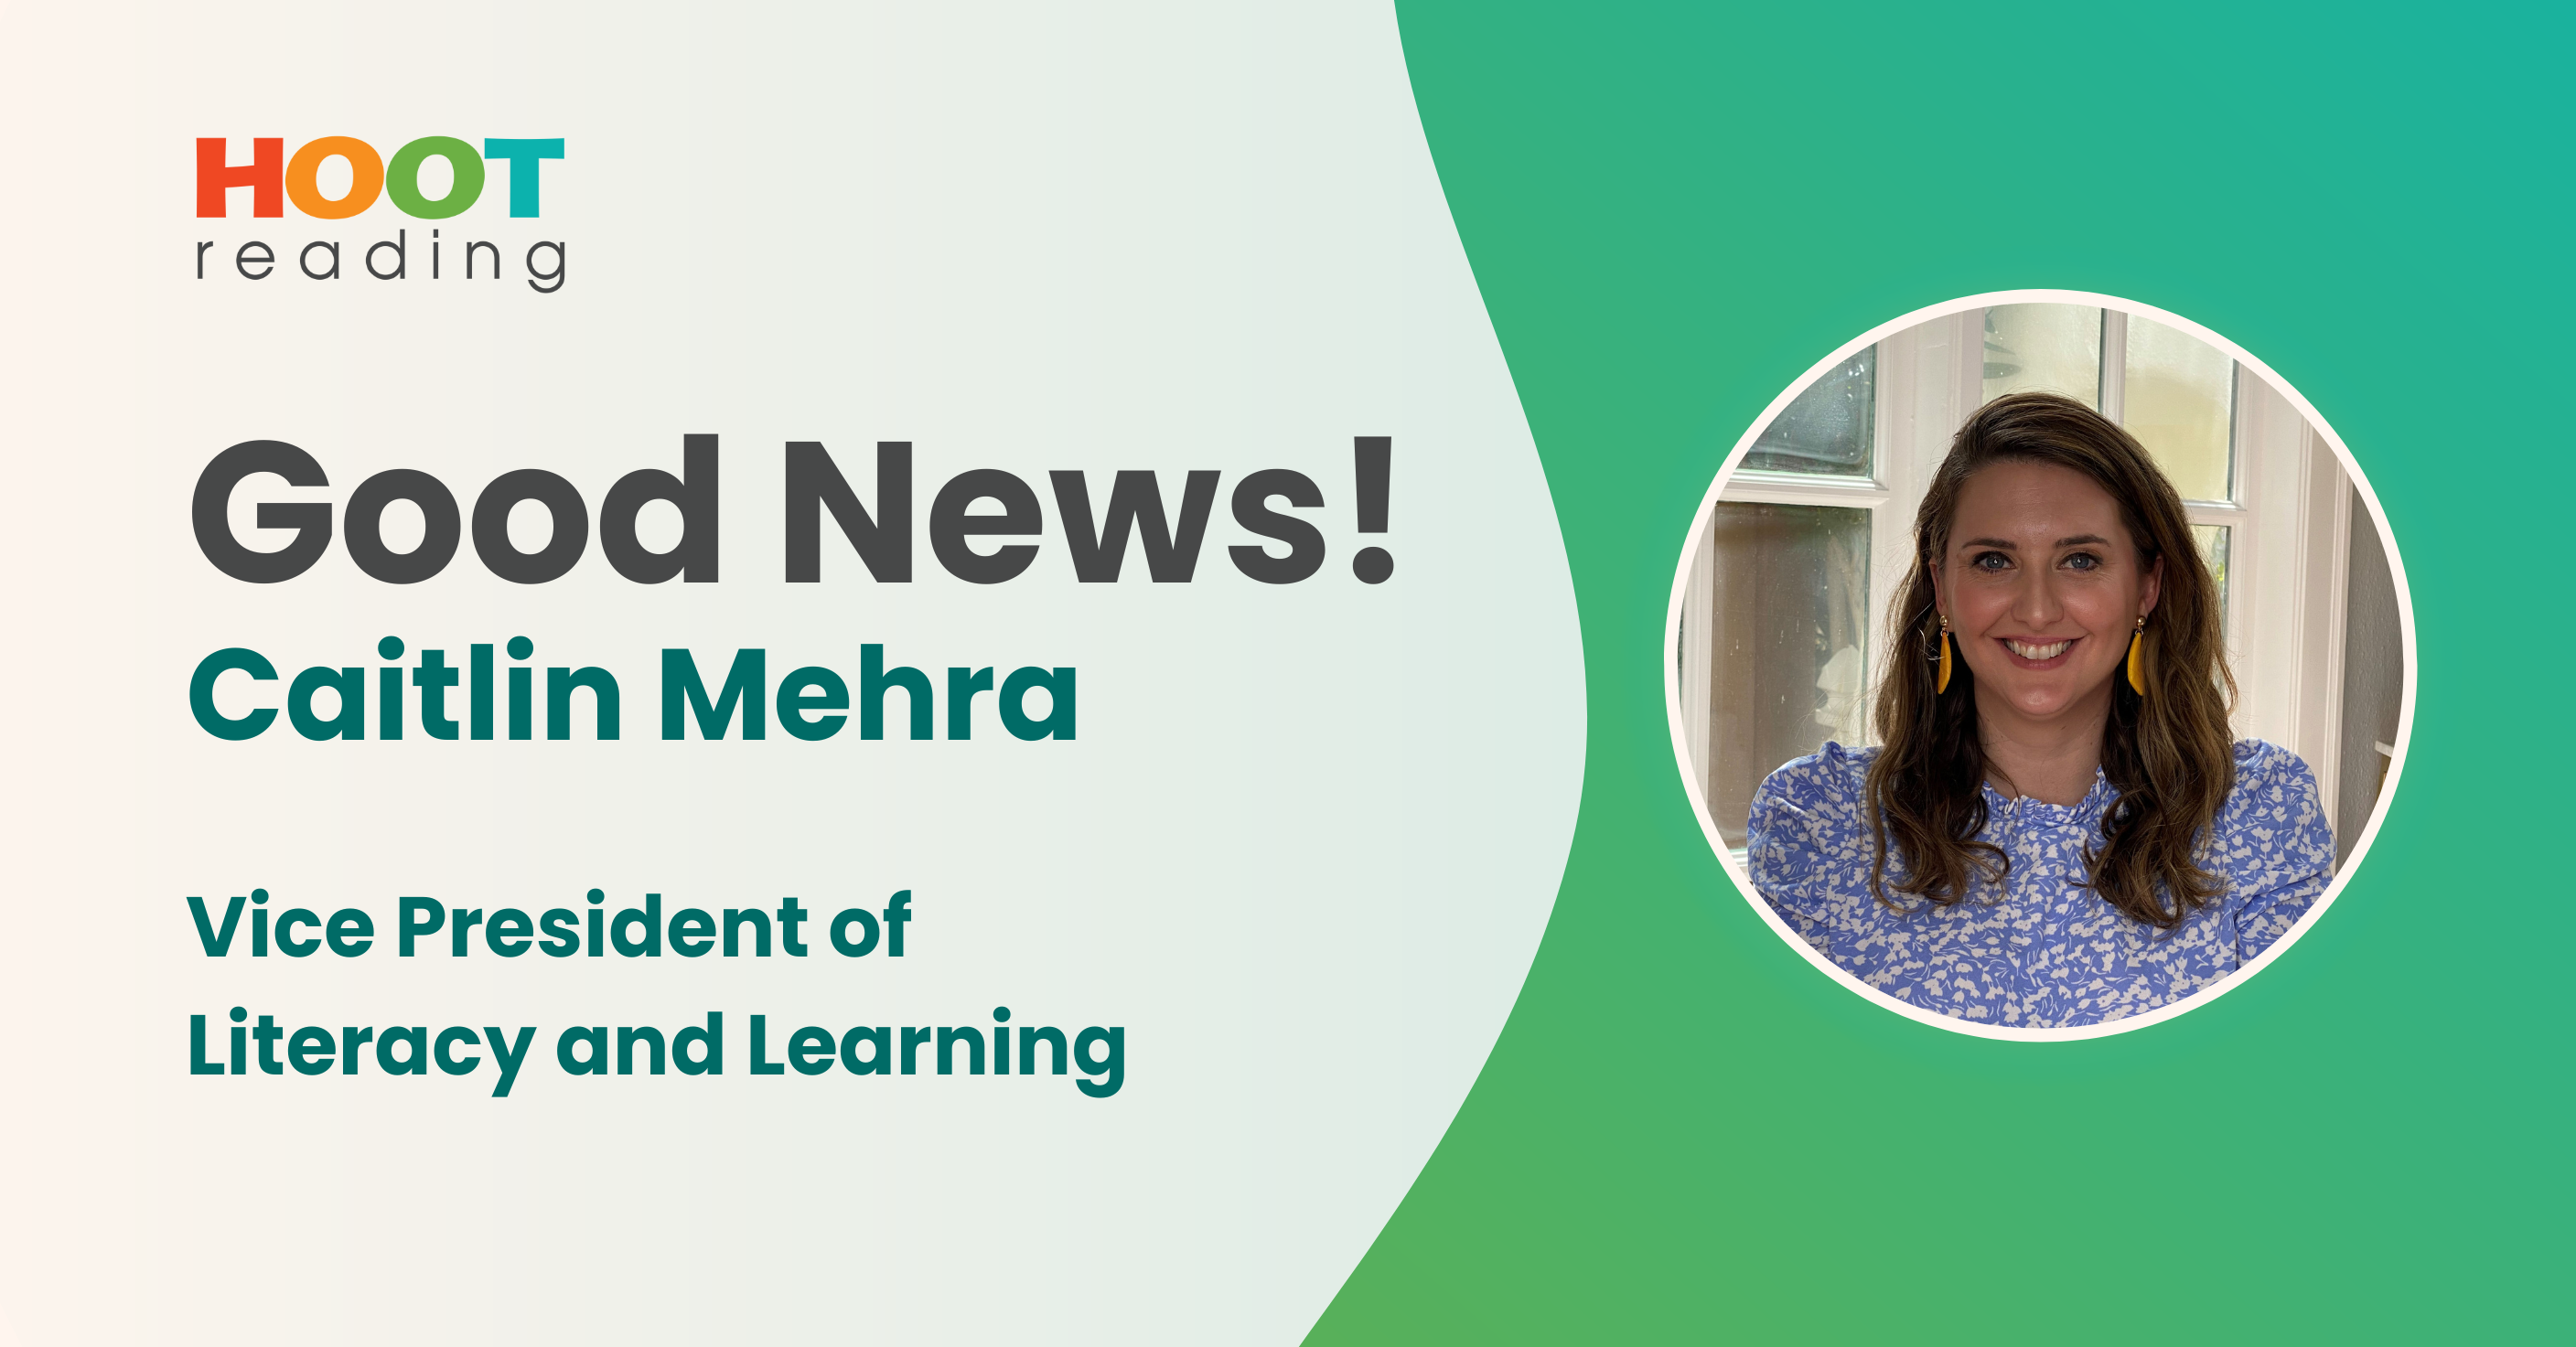 Hoot Reading Announces New Vice President of Literacy, Caitlin Mehra